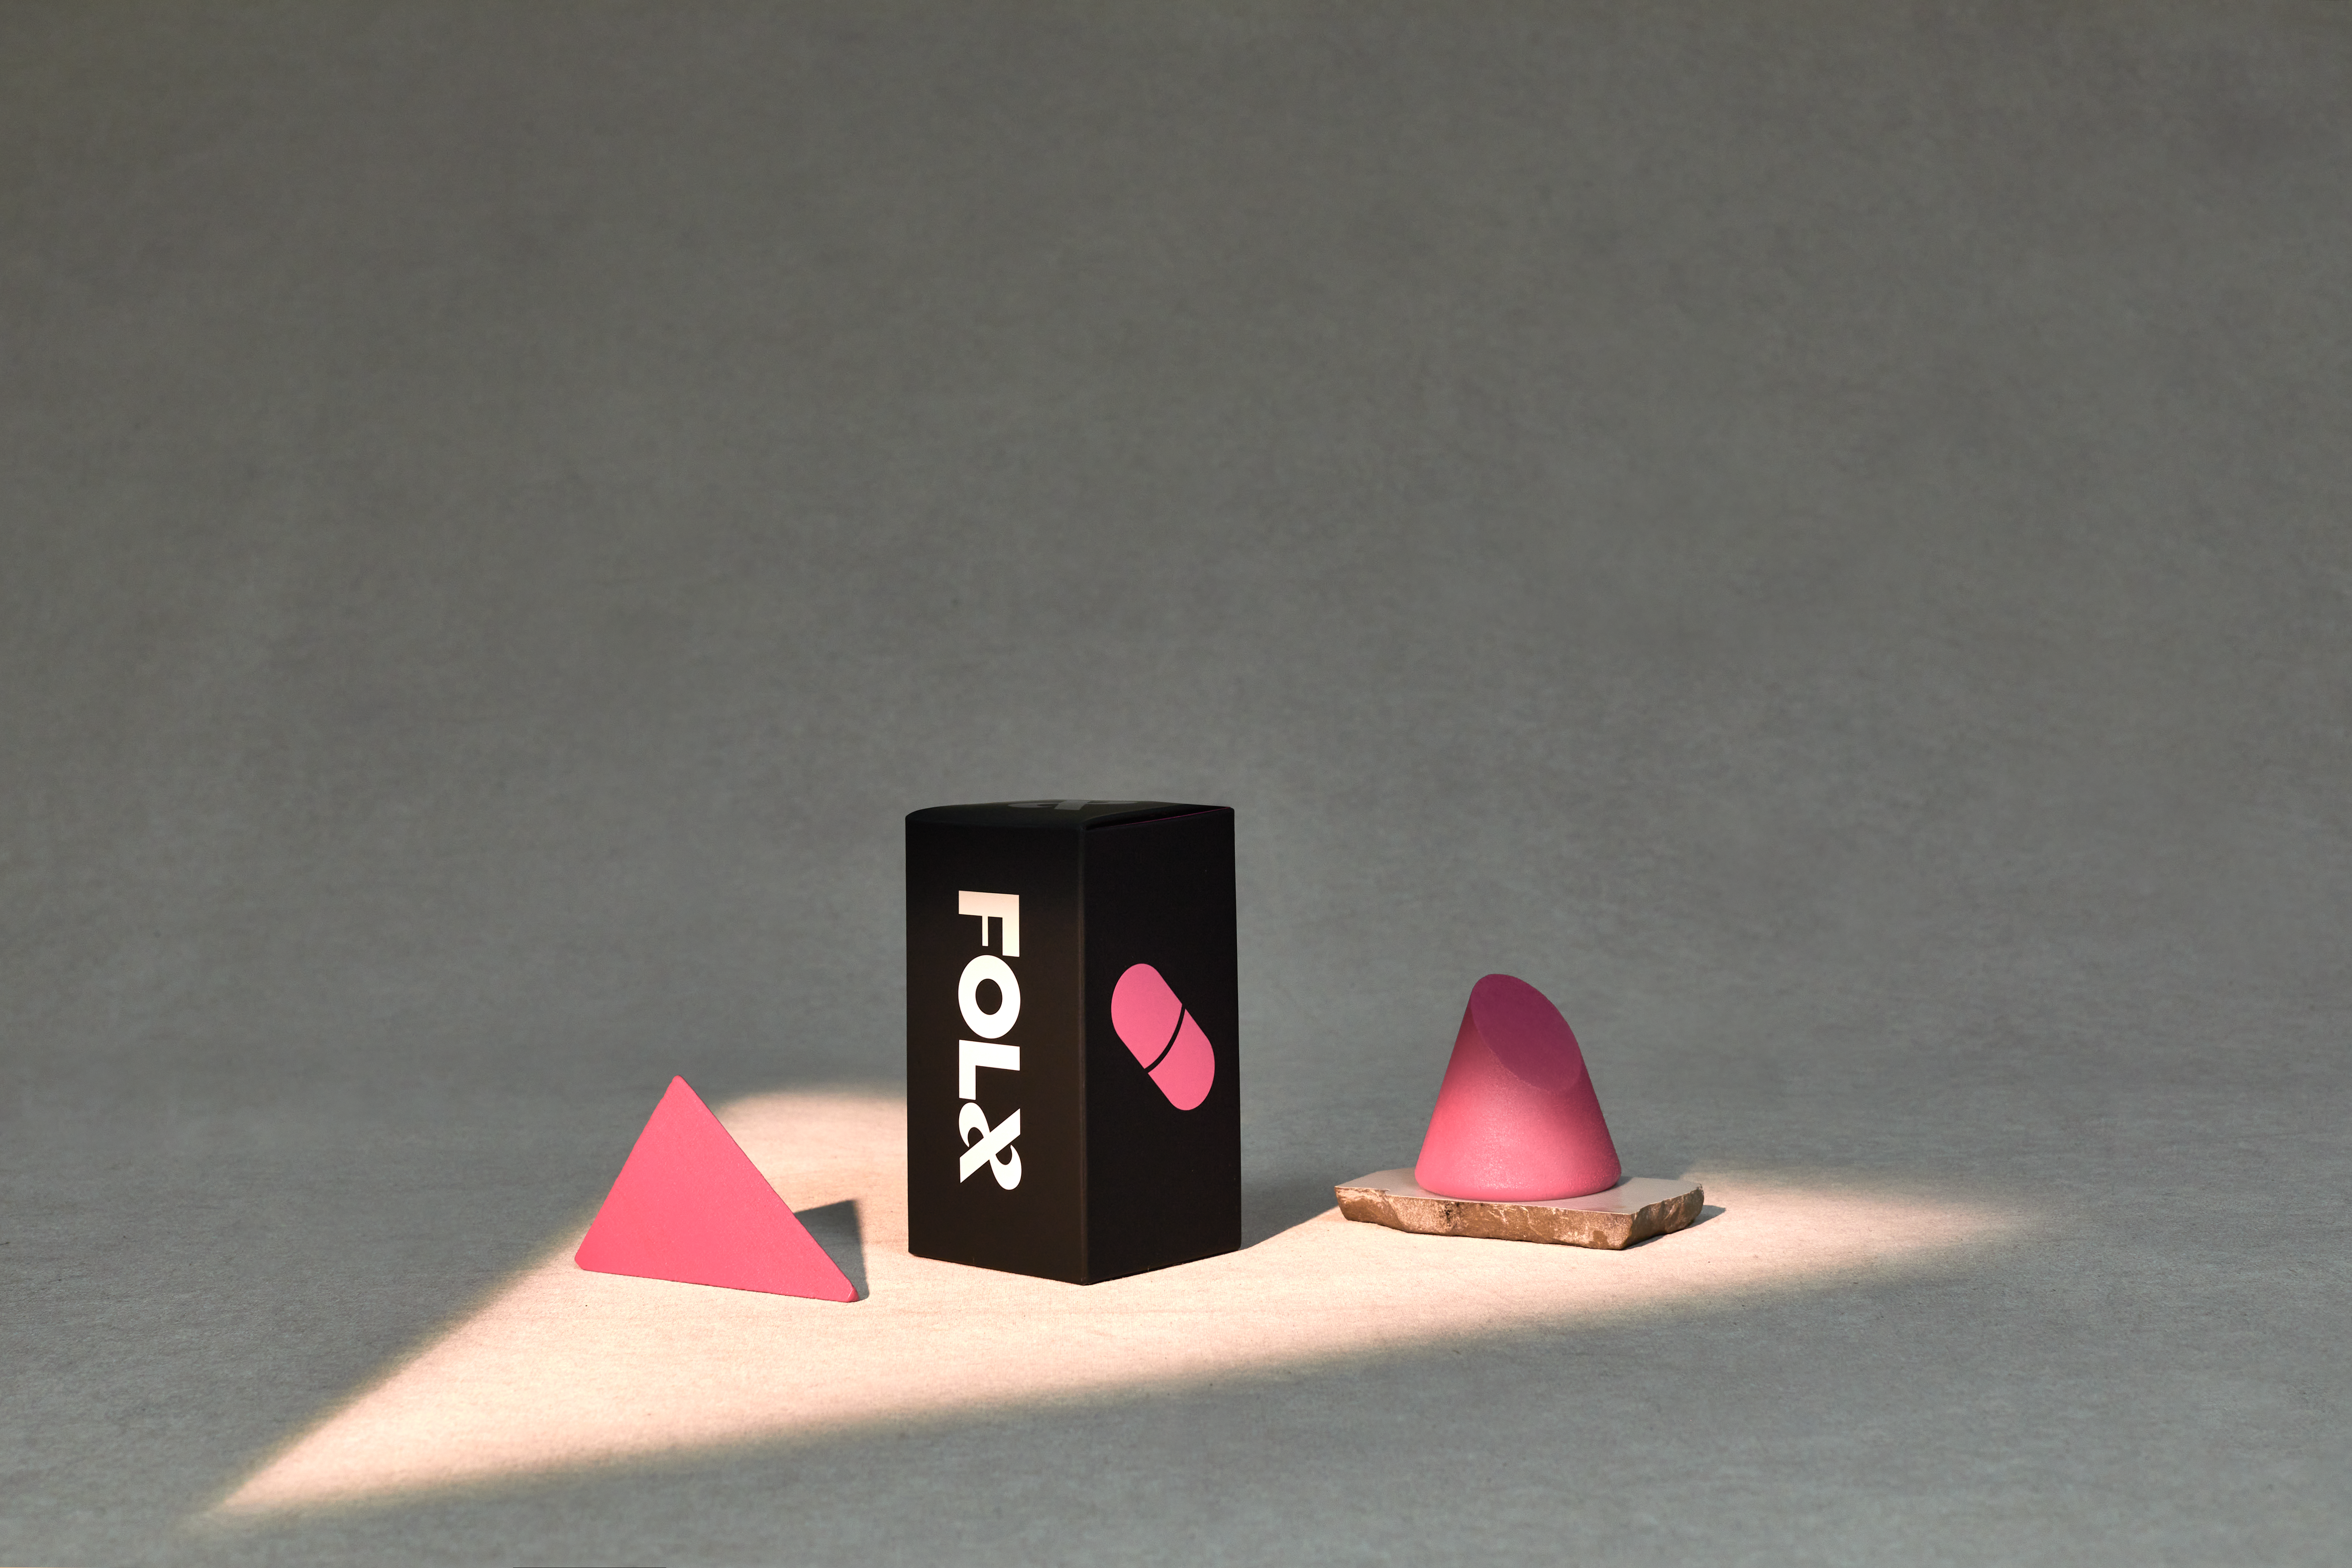 A triangular light over a pink triangle, a black box of FOLX PrEP, and a pink object